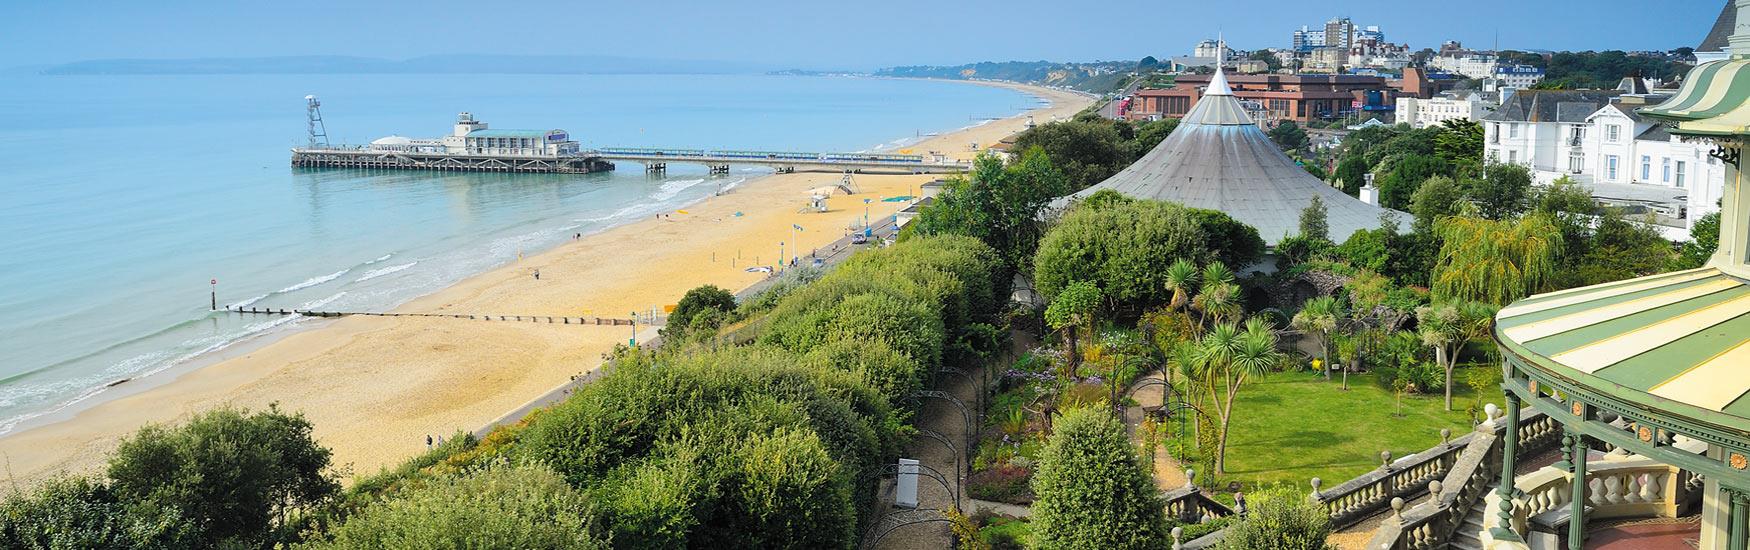 View of the Bay, Pier and Beach from the East Cliff